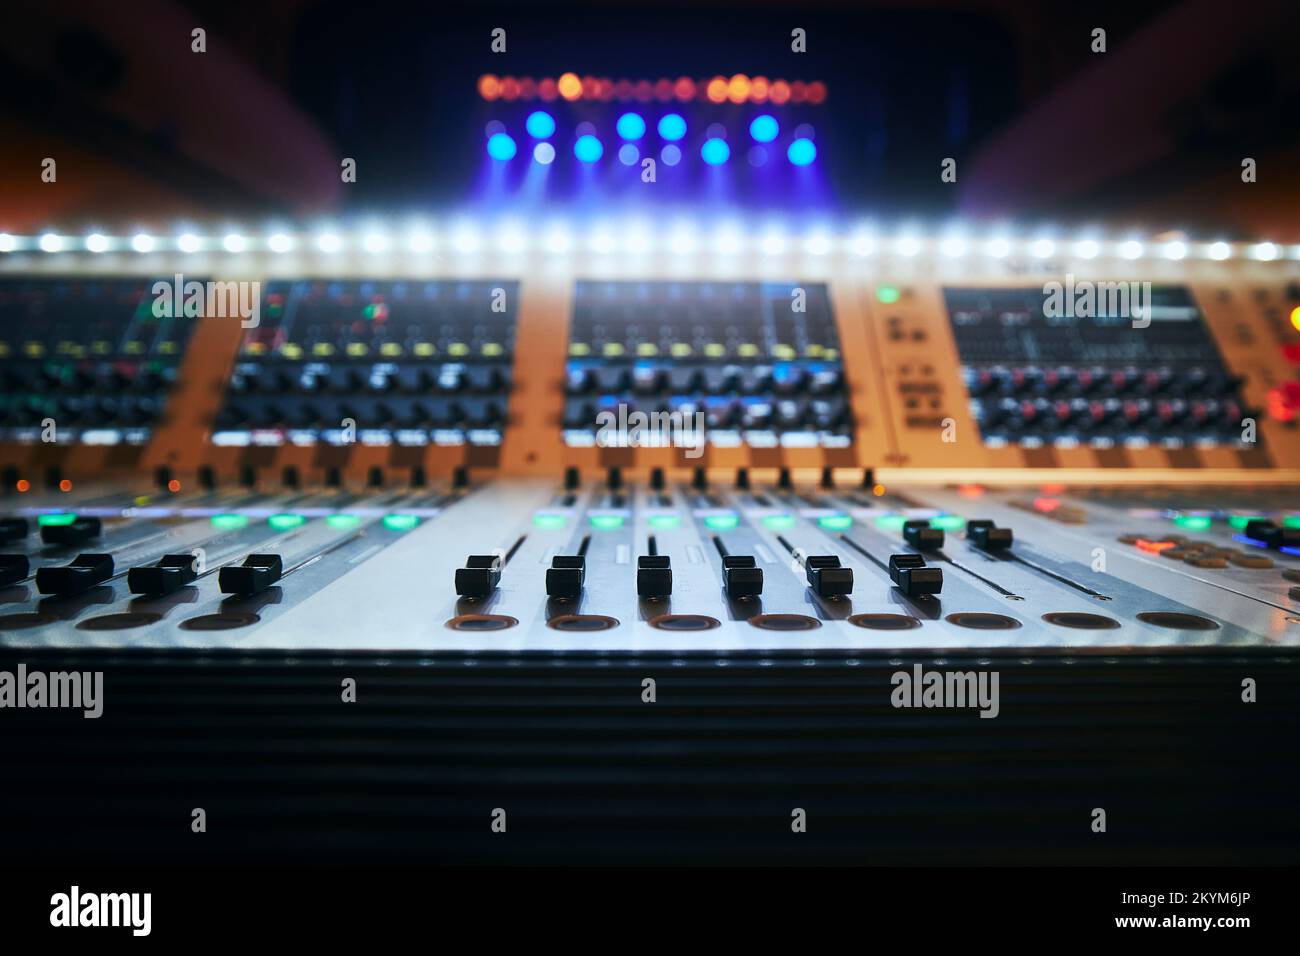 Selective focus on sliders of professional audio mixing console against colorful spotlights. Stock Photo